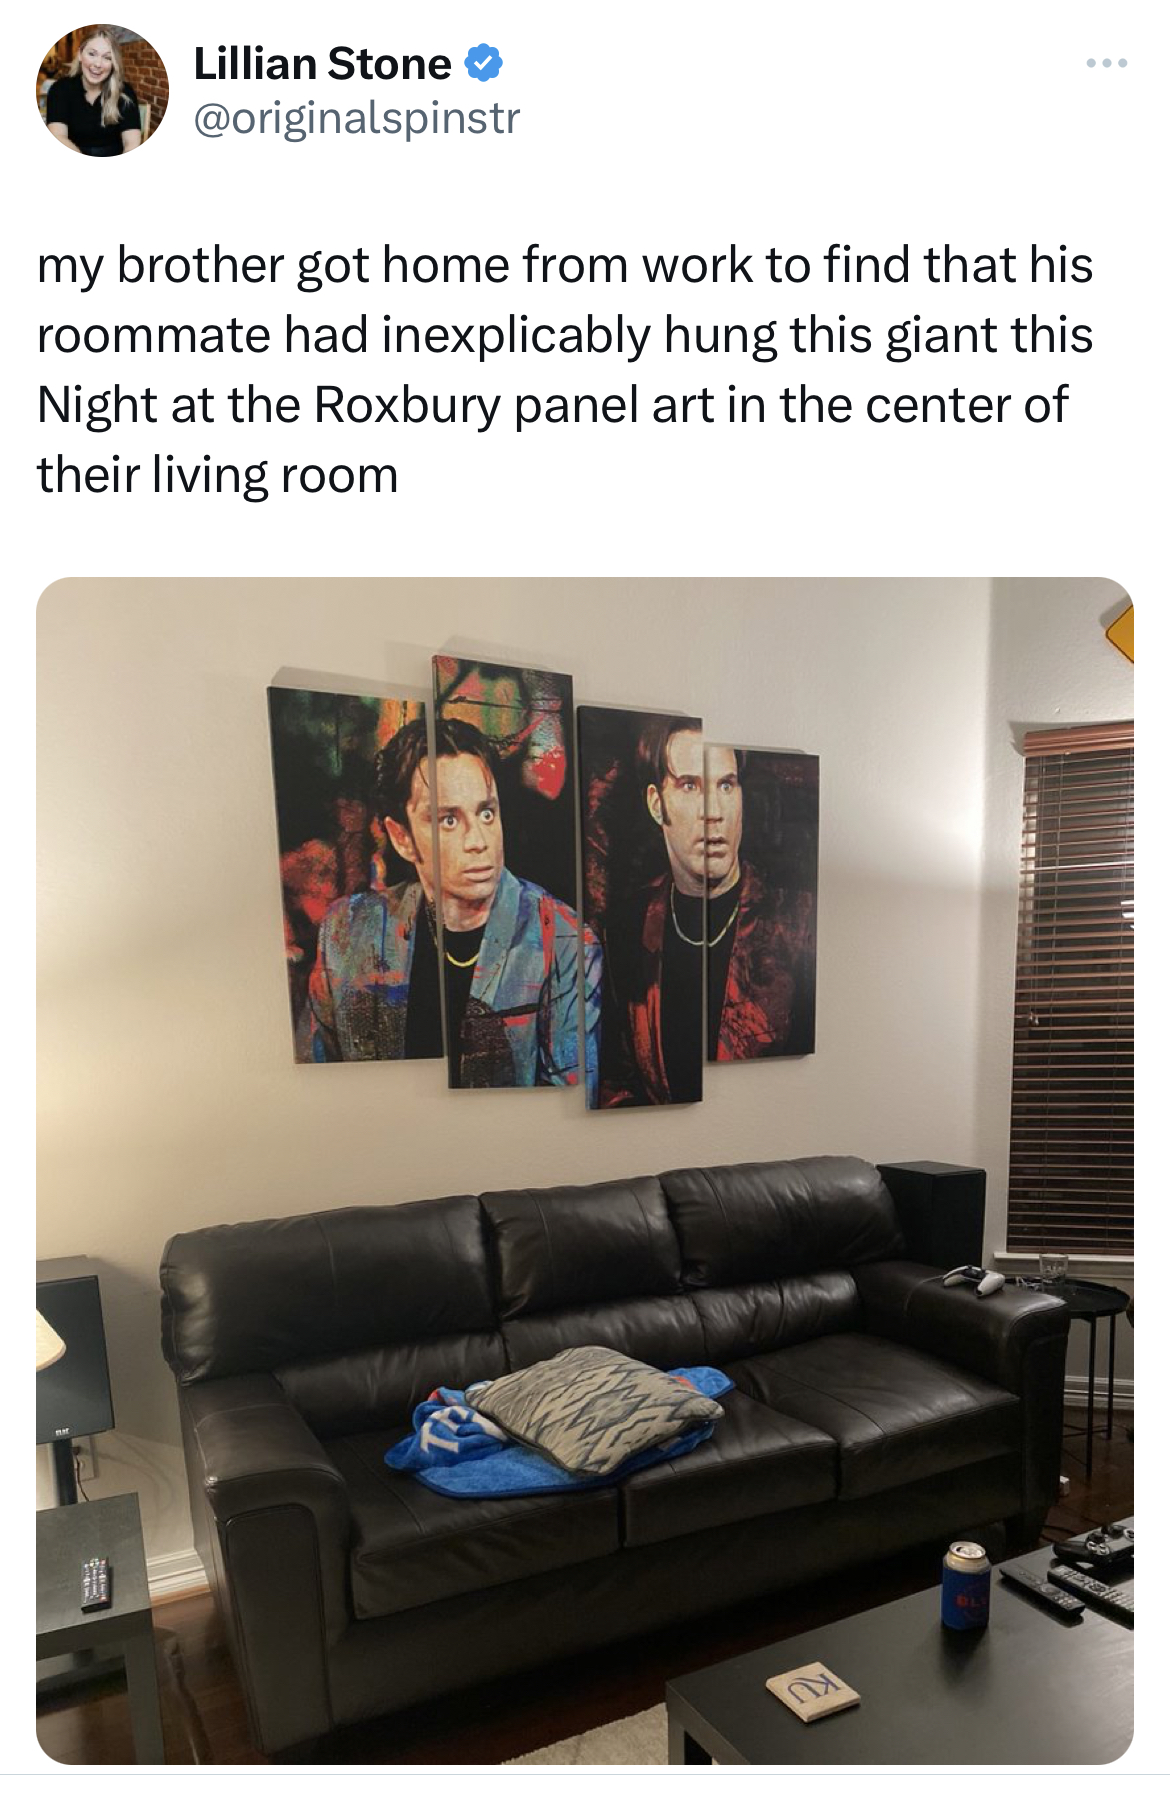 savage tweets - couch - Lillian Stone my brother got home from work to find that his roommate had inexplicably hung this giant this Night at the Roxbury panel art in the center of their living room Da